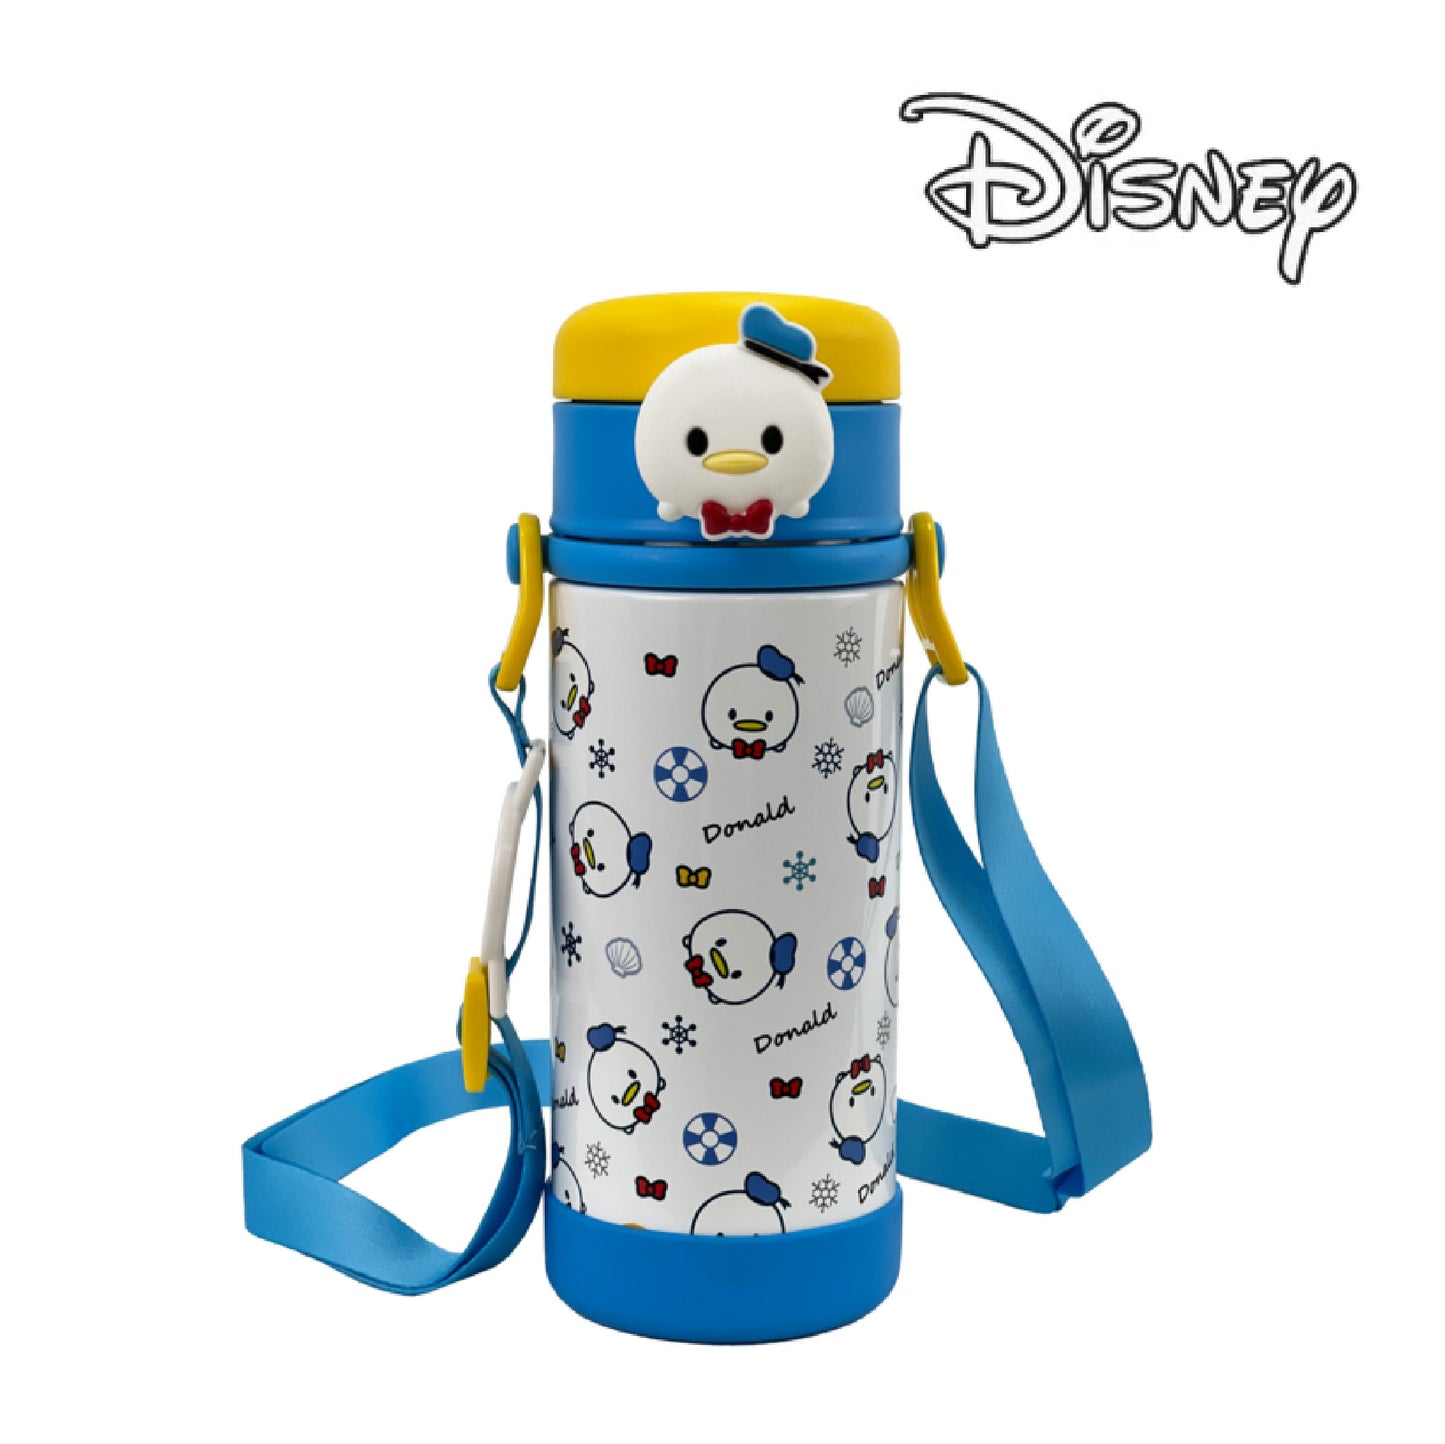 [Disney Water Bottle] Disney series thermos bottle and cup straps - 5 styles to choose from